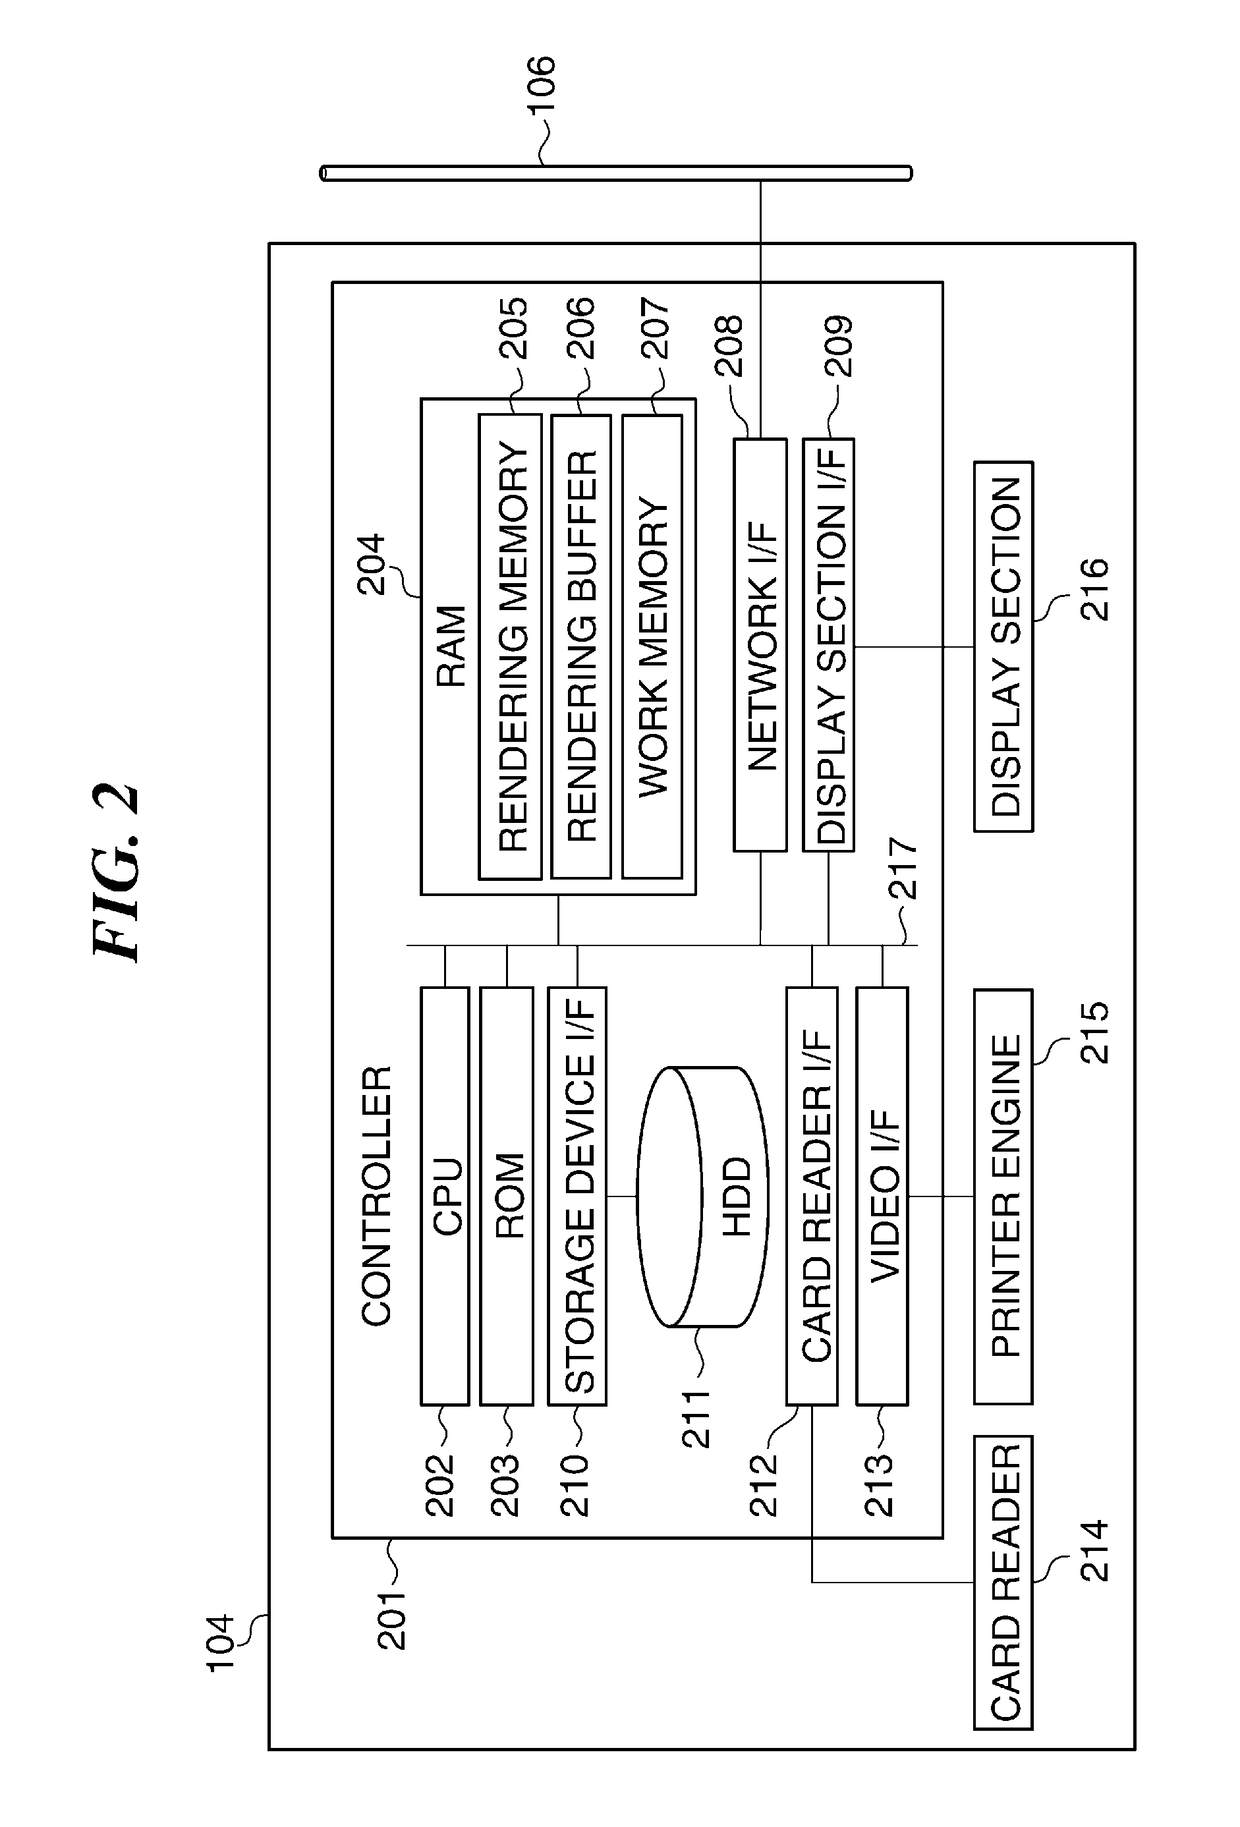 Image processing system that performs preview display, image processing apparatus, display control apparatus, display control method, and storage medium